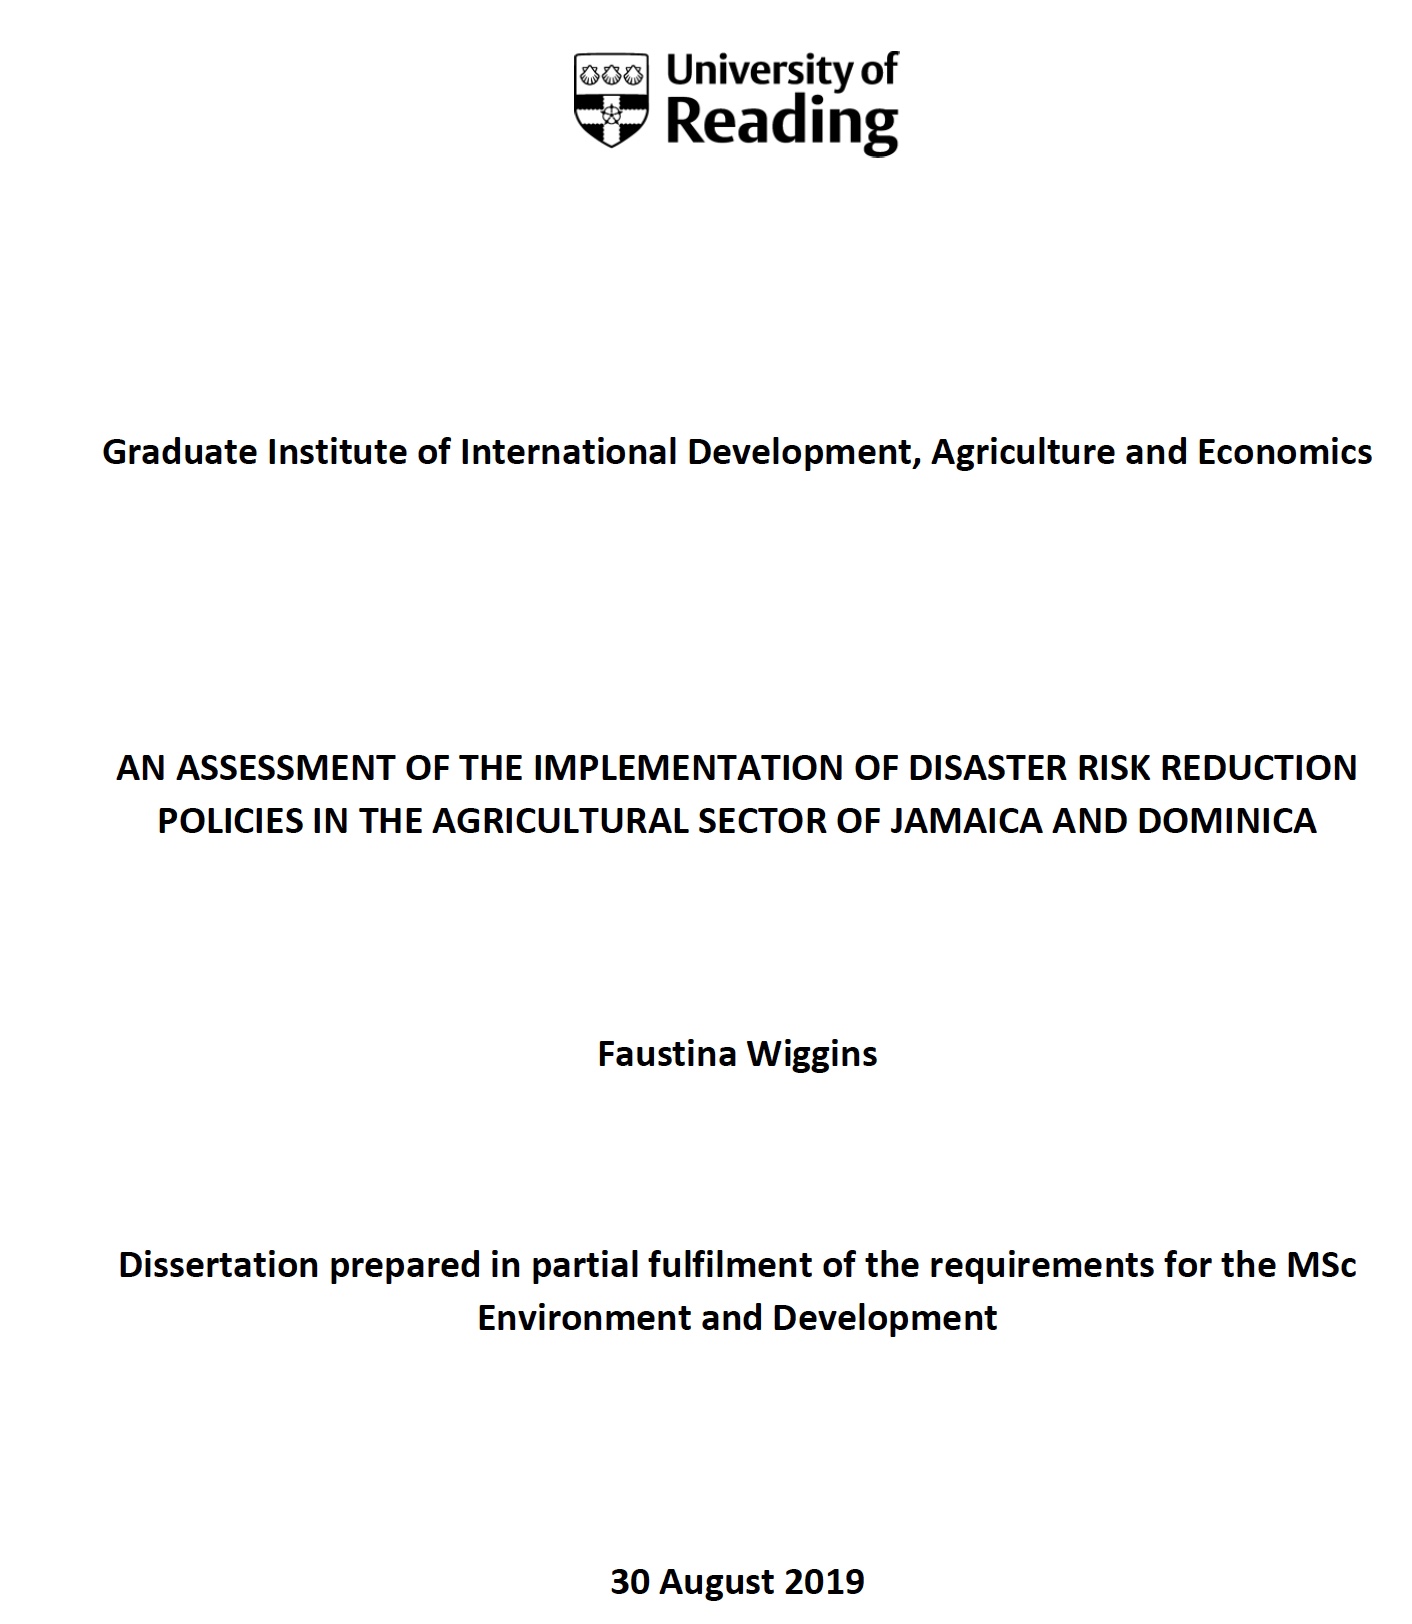 An Assessment of the Implementation of Disaster Risk Reduction Policies in the Agricultural Sector of Jamaica and Dominica